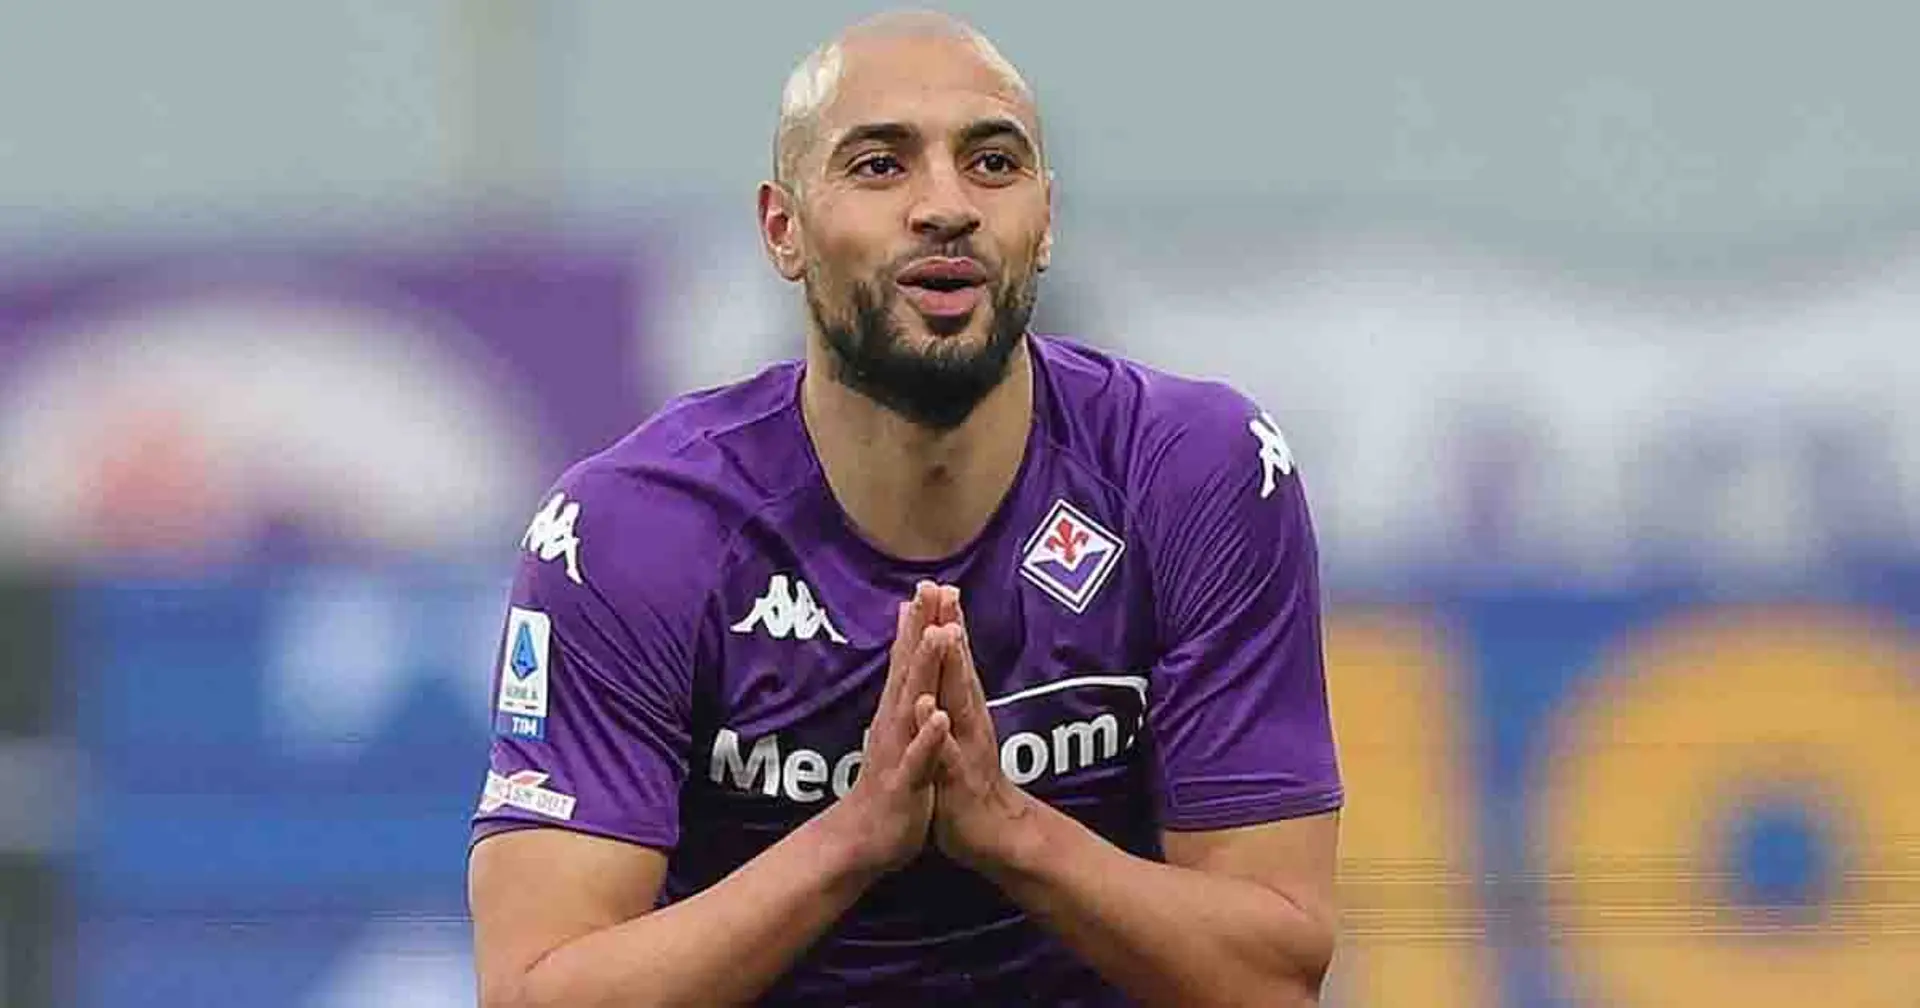 Revealed: Fiorentina's response to Man United's loan offer for Amrabat (reliability: 4 stars)